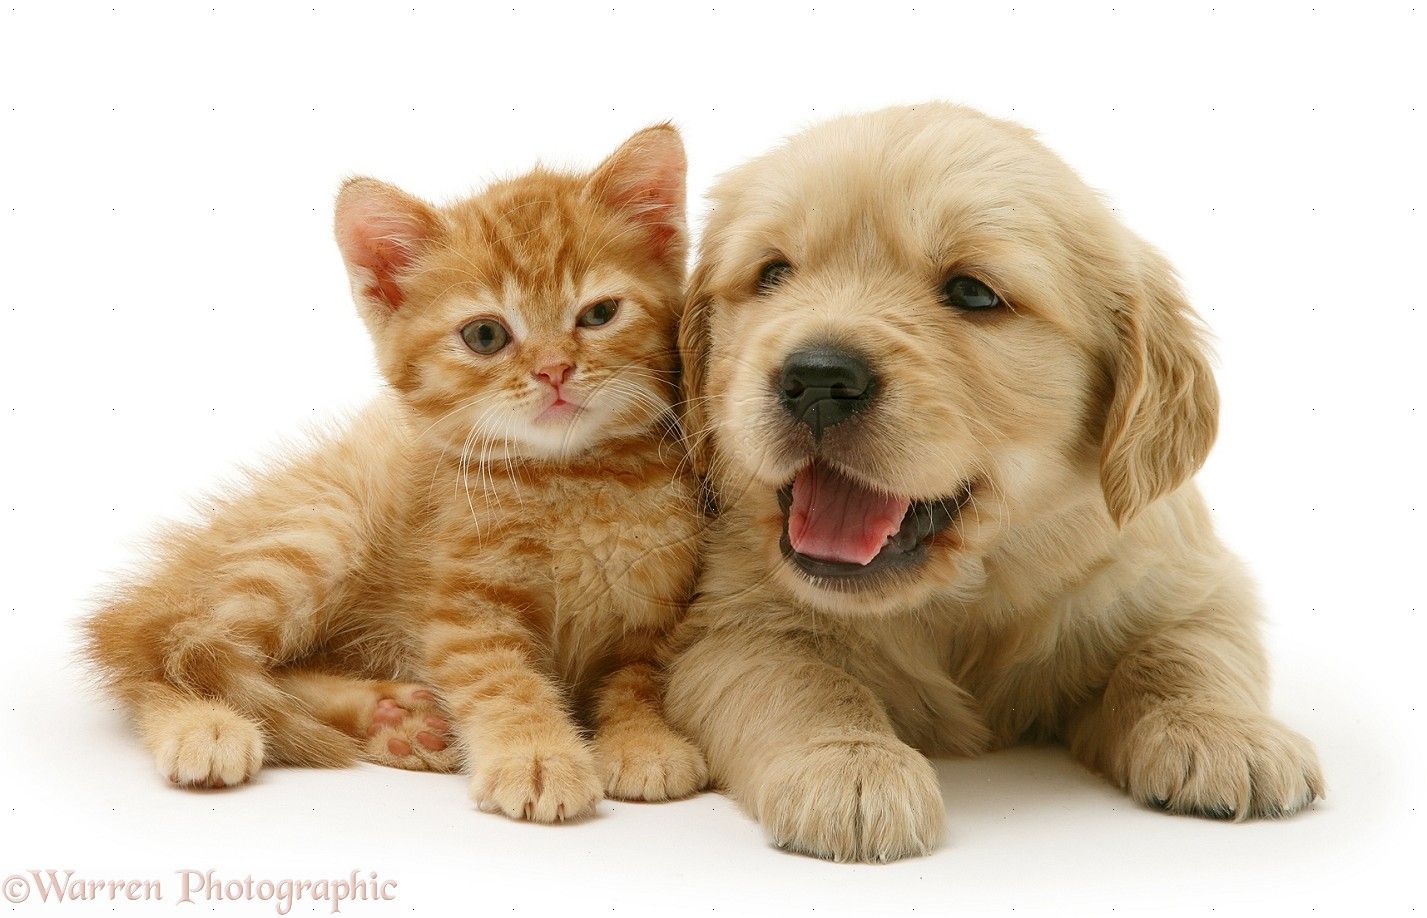 Free download Cute Puppy and Kitten Wallpaper [1427x918] for your Desktop, Mobile & Tablet. Explore Puppies And Kittens Wallpaper. Free Kittens Wallpaper for Desktop, Image Kittens and Puppies Wallpaper